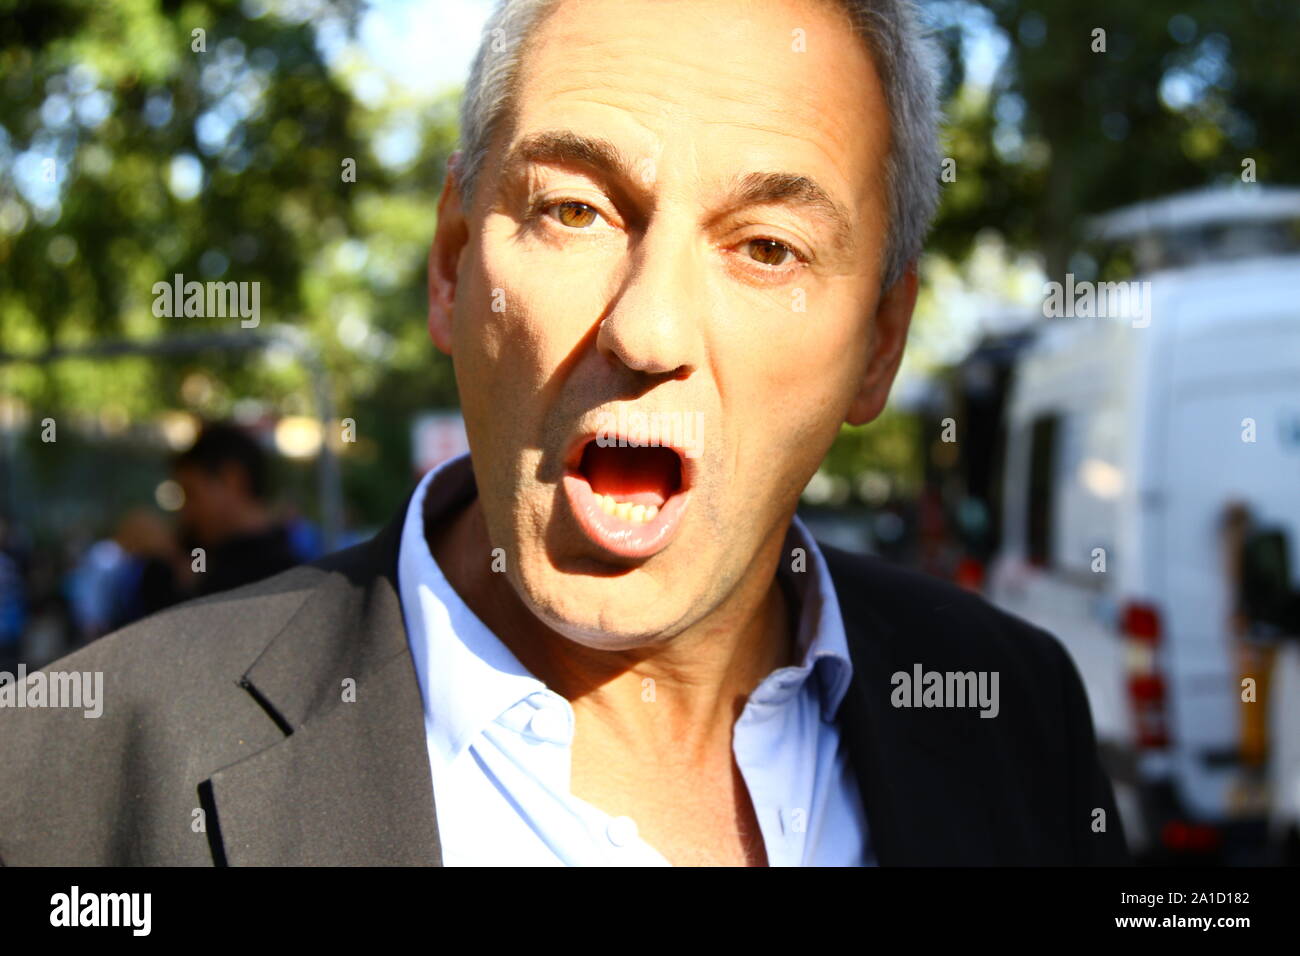 Kevin Maguire is a British journalist and Associate editor at the Daily Mirror newspaper pictured here talking at College Green, Westminster on 25th September 2019. Political journalists. Journalism. Newspapers. Stock Photo